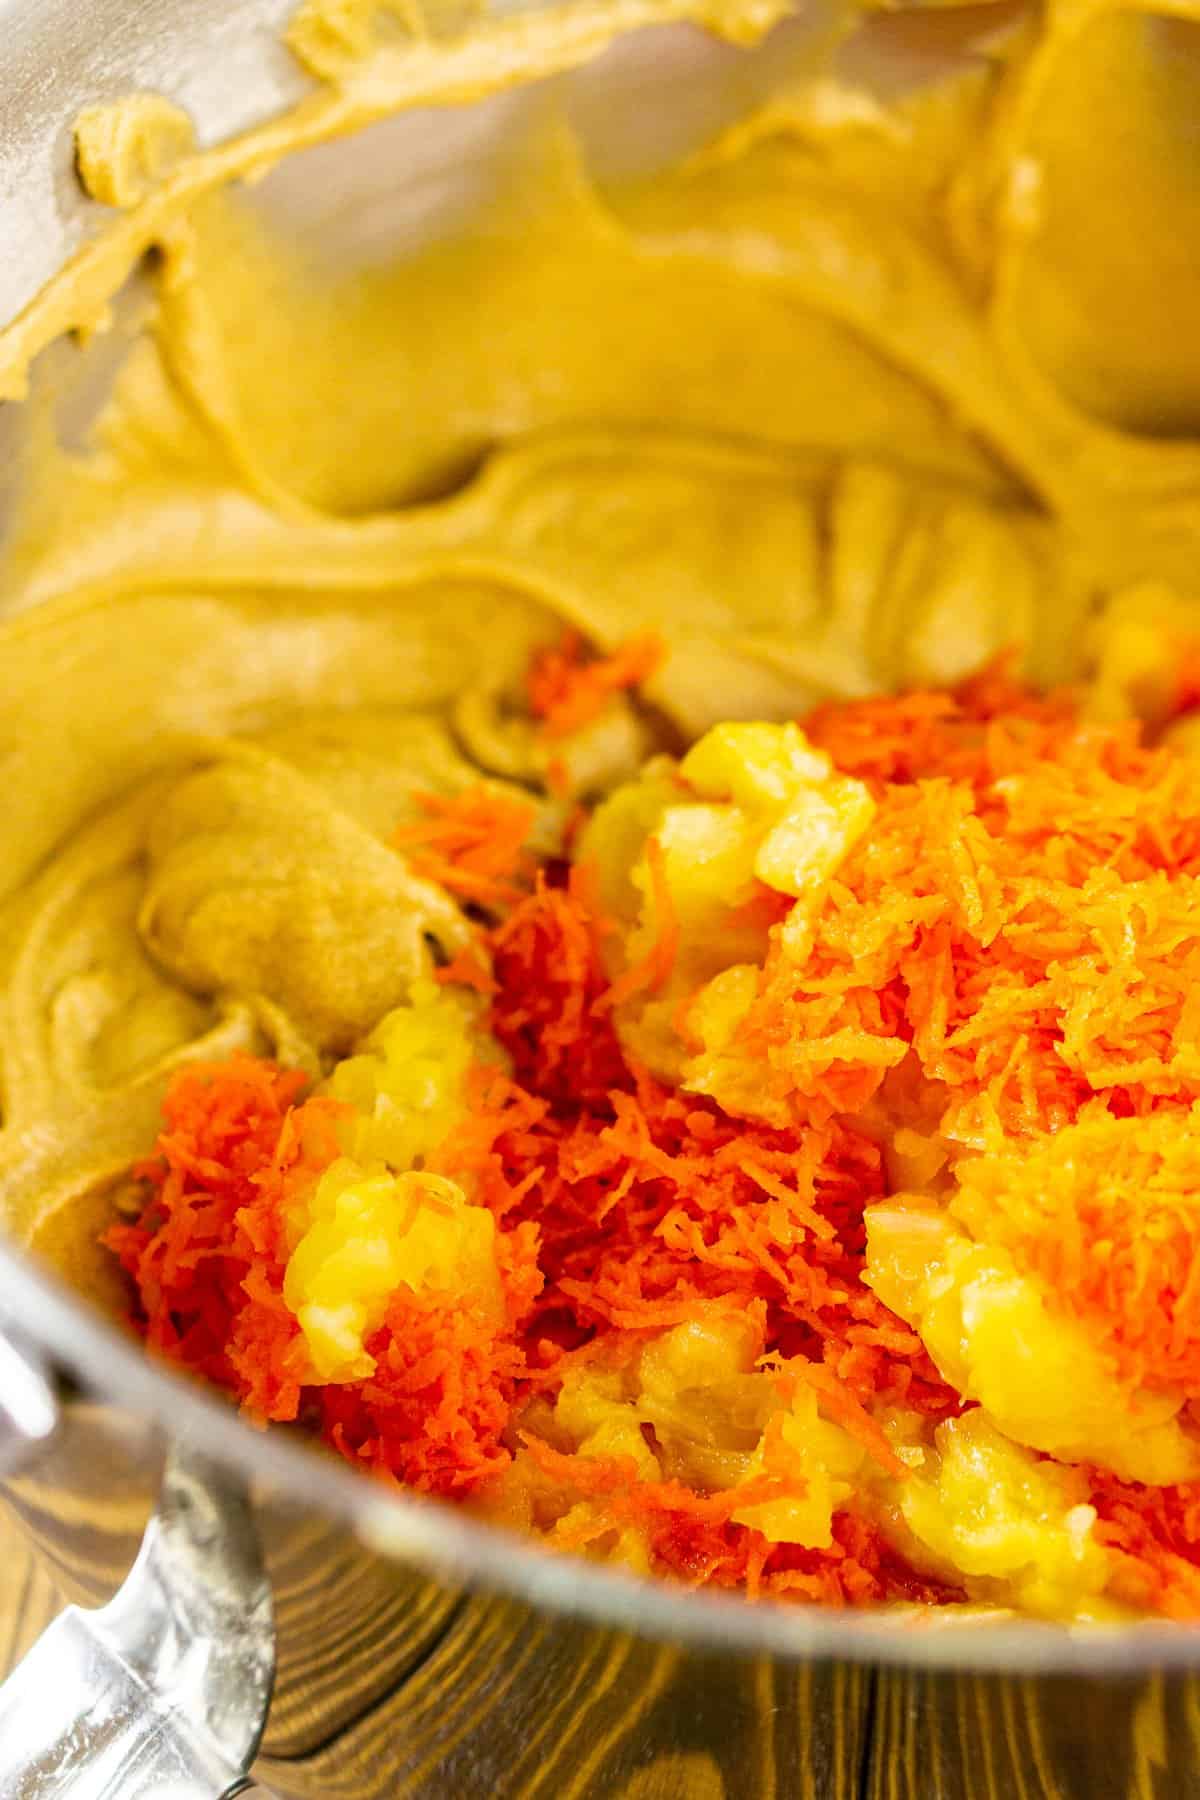 Stirring in the pineapple, carrots and coconut into the batter in a mixing bowl.